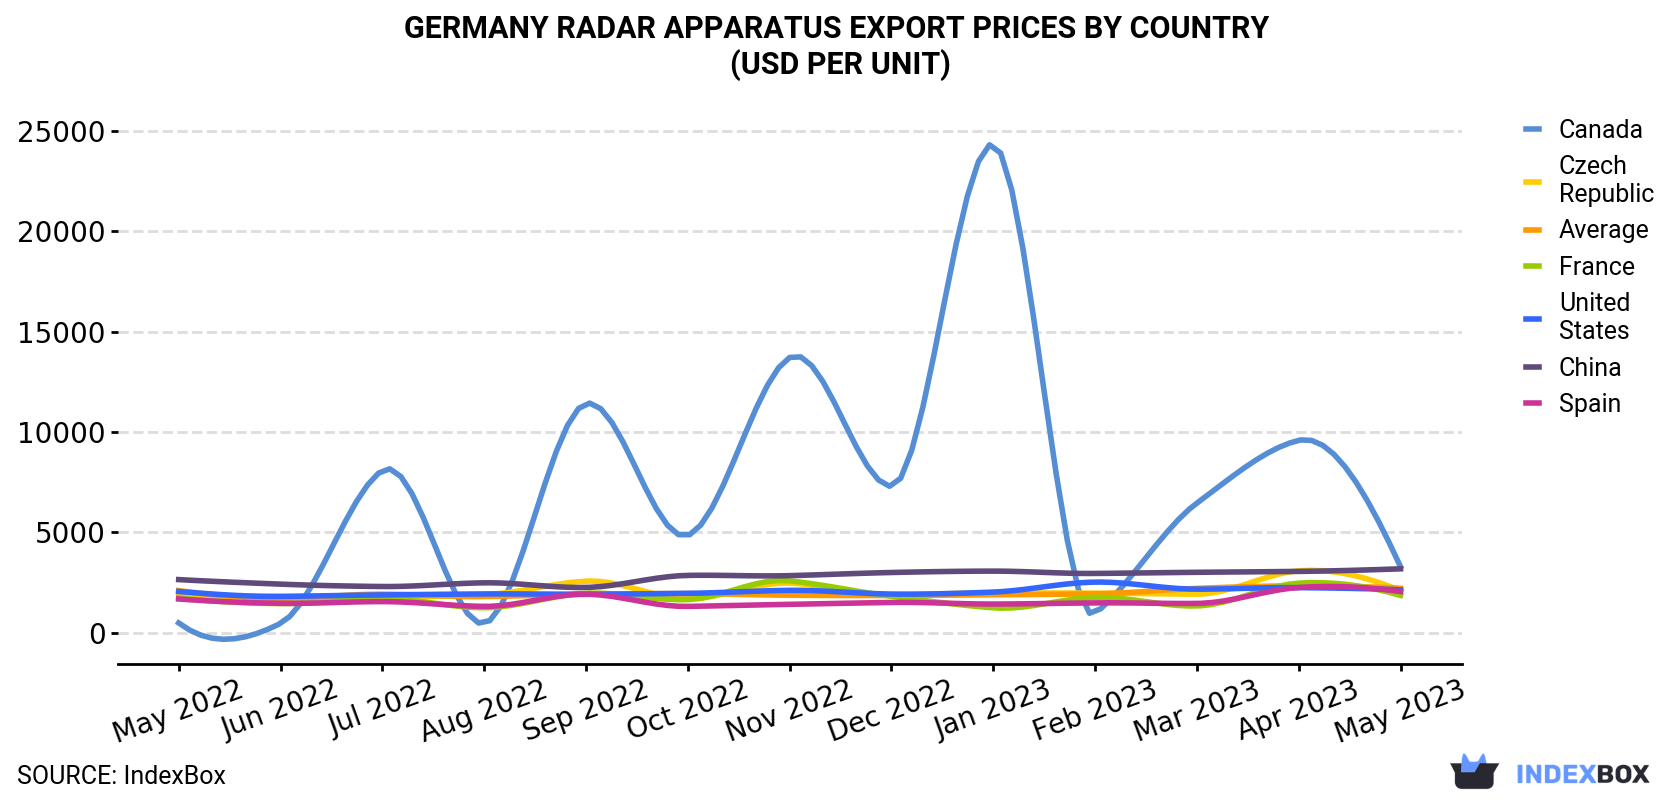 Germany Radar Apparatus Export Prices By Country (USD Per Unit)